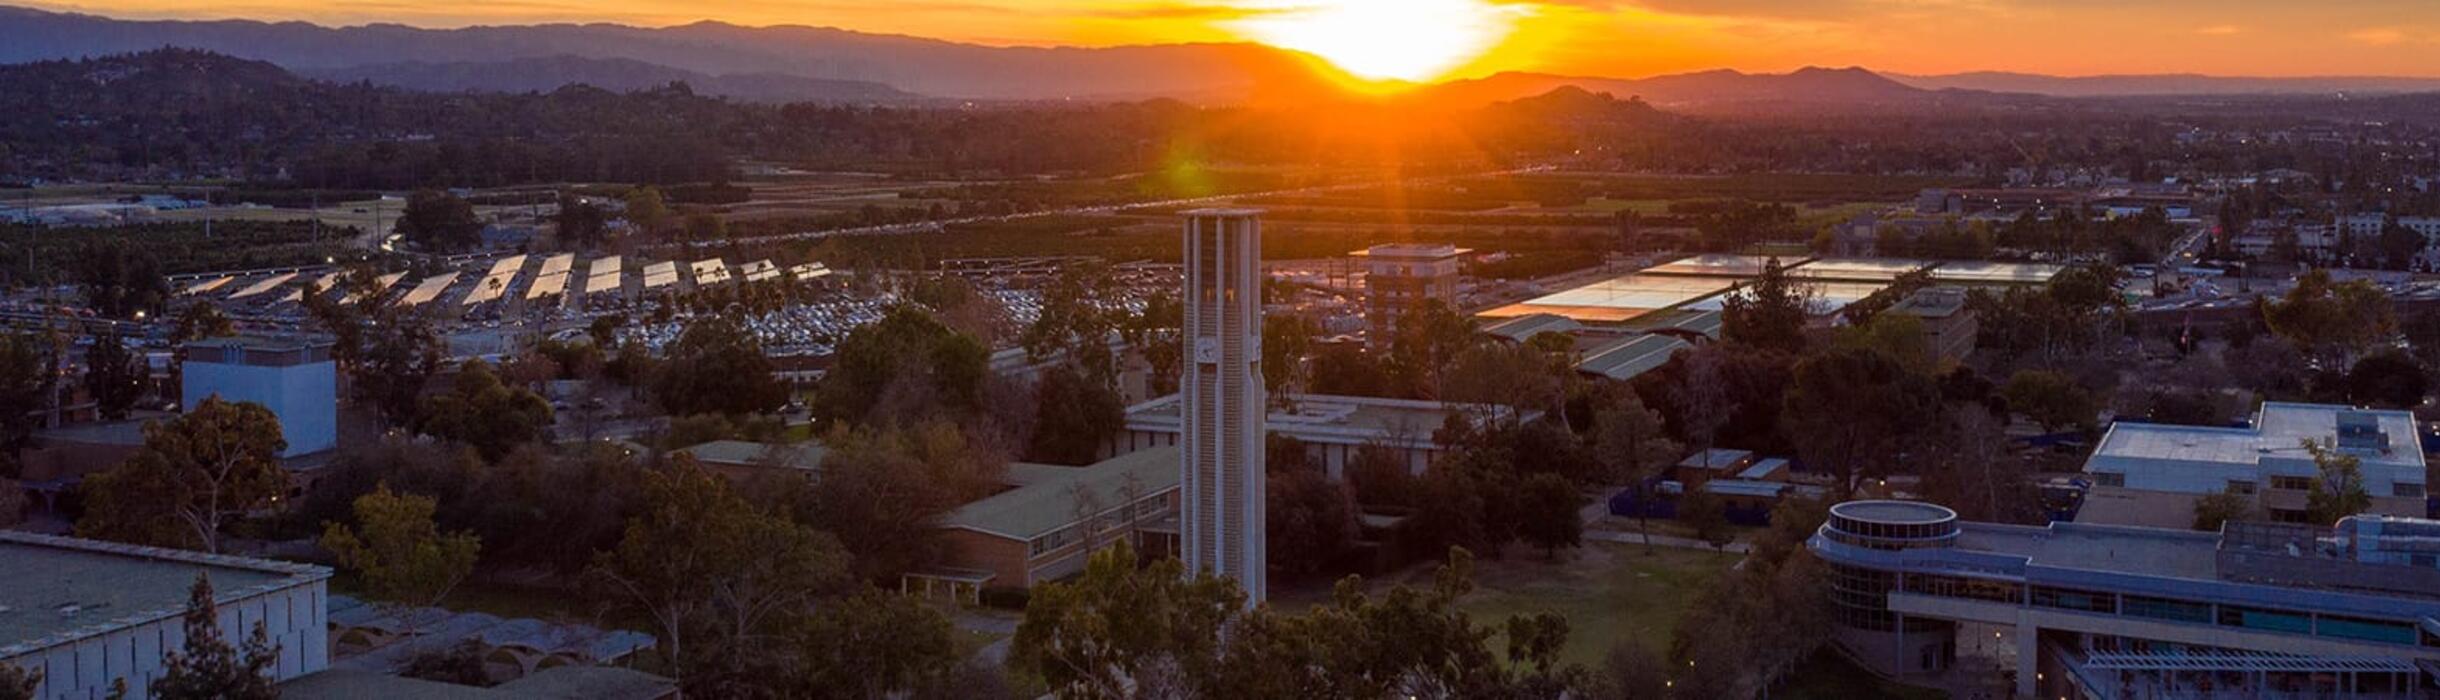 UC Riverside campus and bell tower at sunset